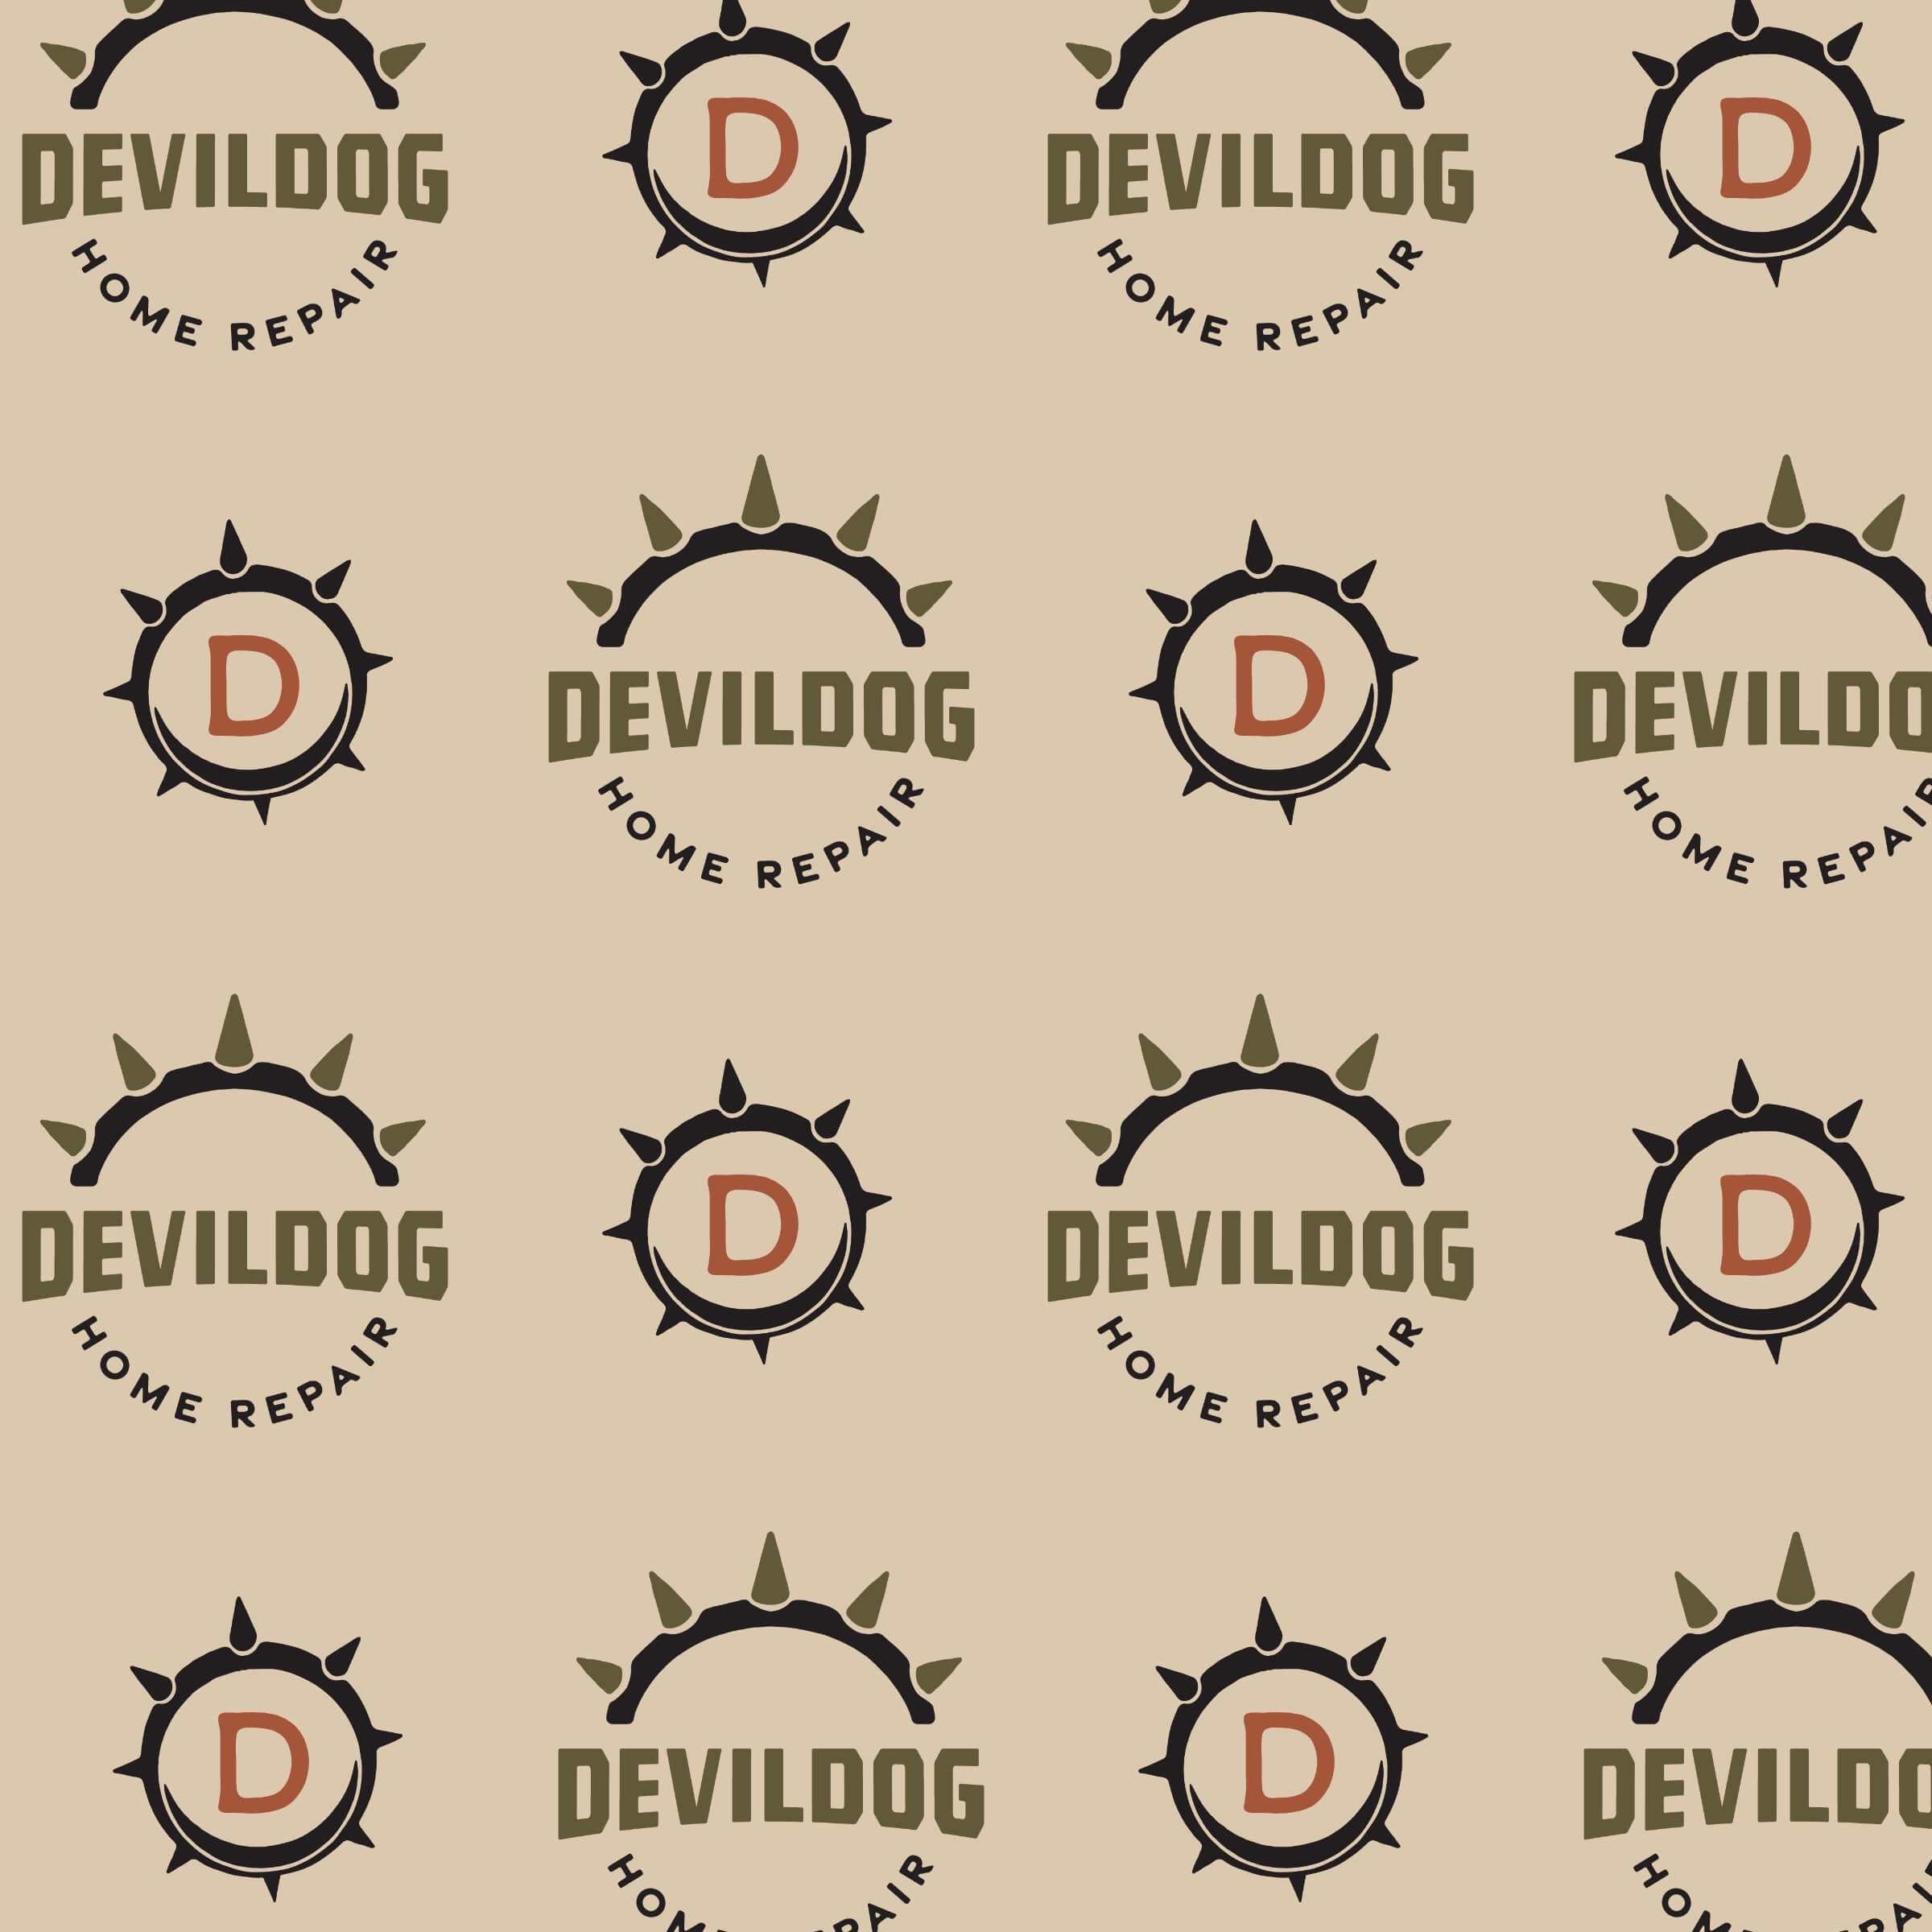 A pattern of alternate logos on a tan background.